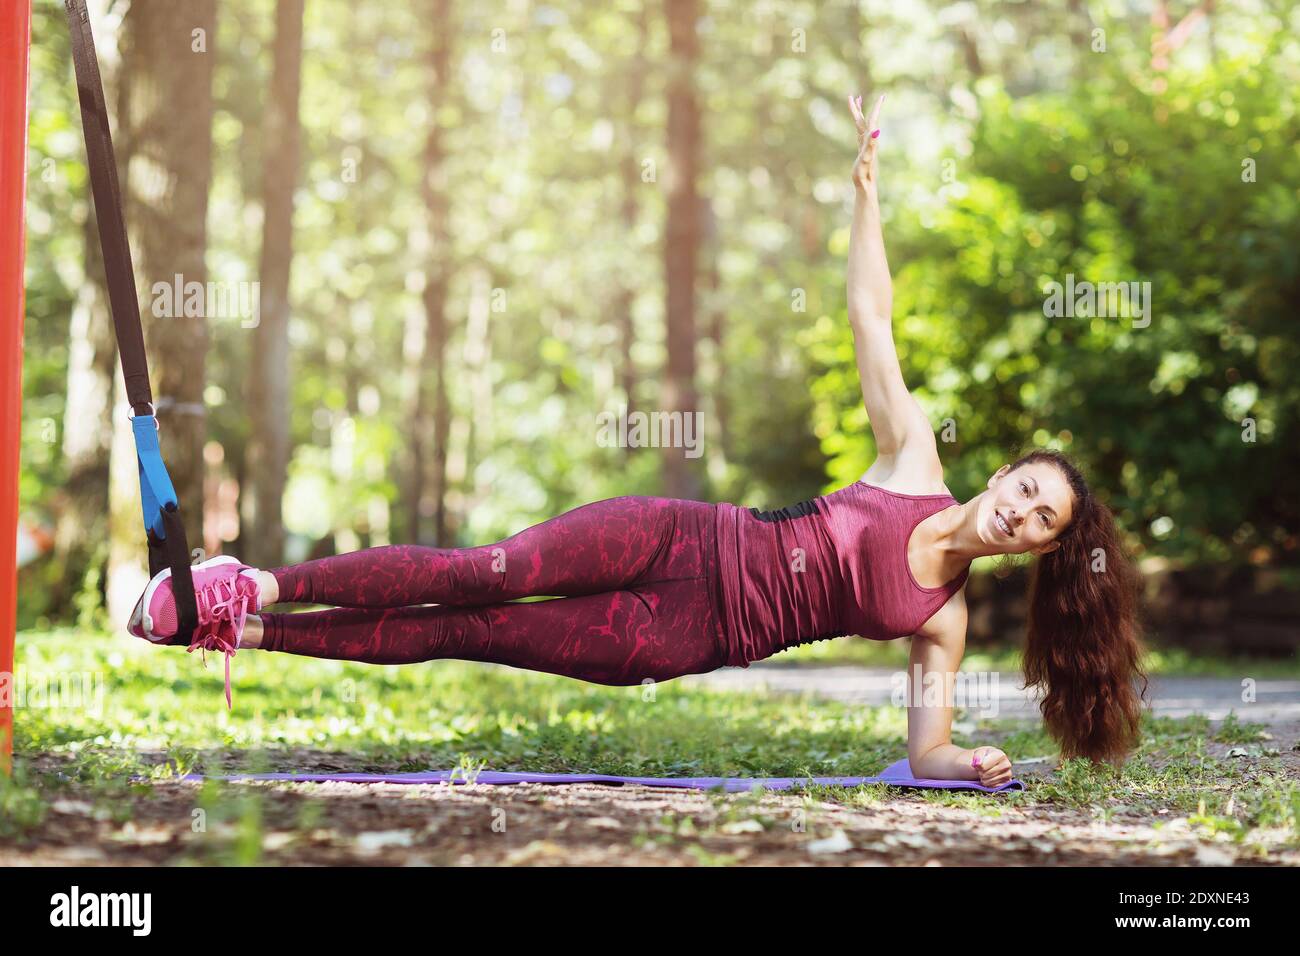 A young woman performs a side plank exercise on a suspended machine attached to a horizontal bar in a park. Stock Photo